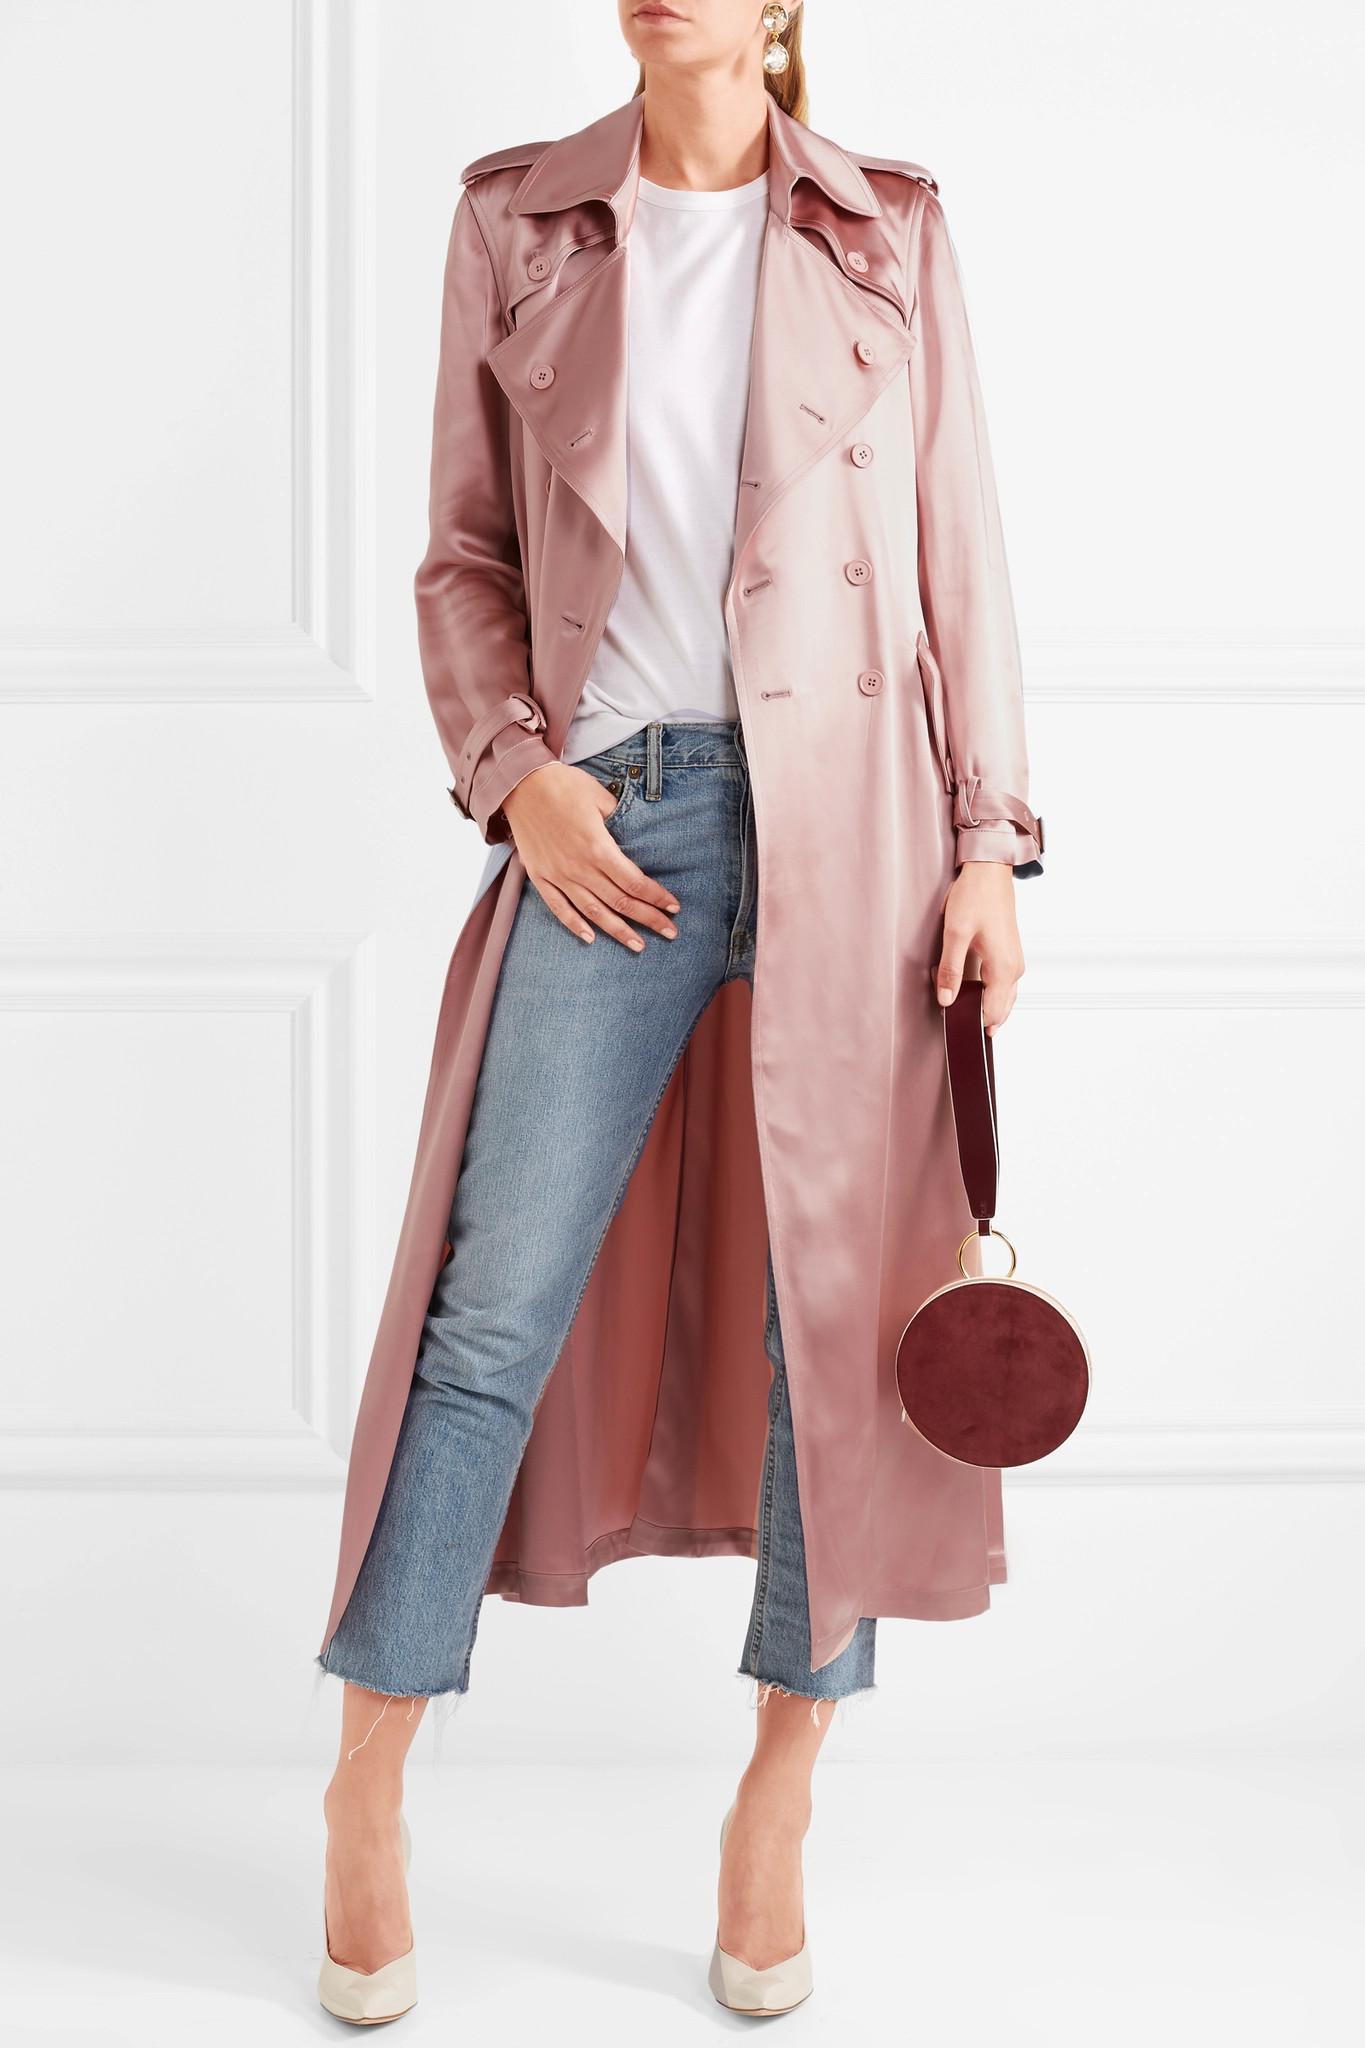 Louis Vuitton - Authenticated Trench Coat - Silk Pink Plain for Women, Very Good Condition